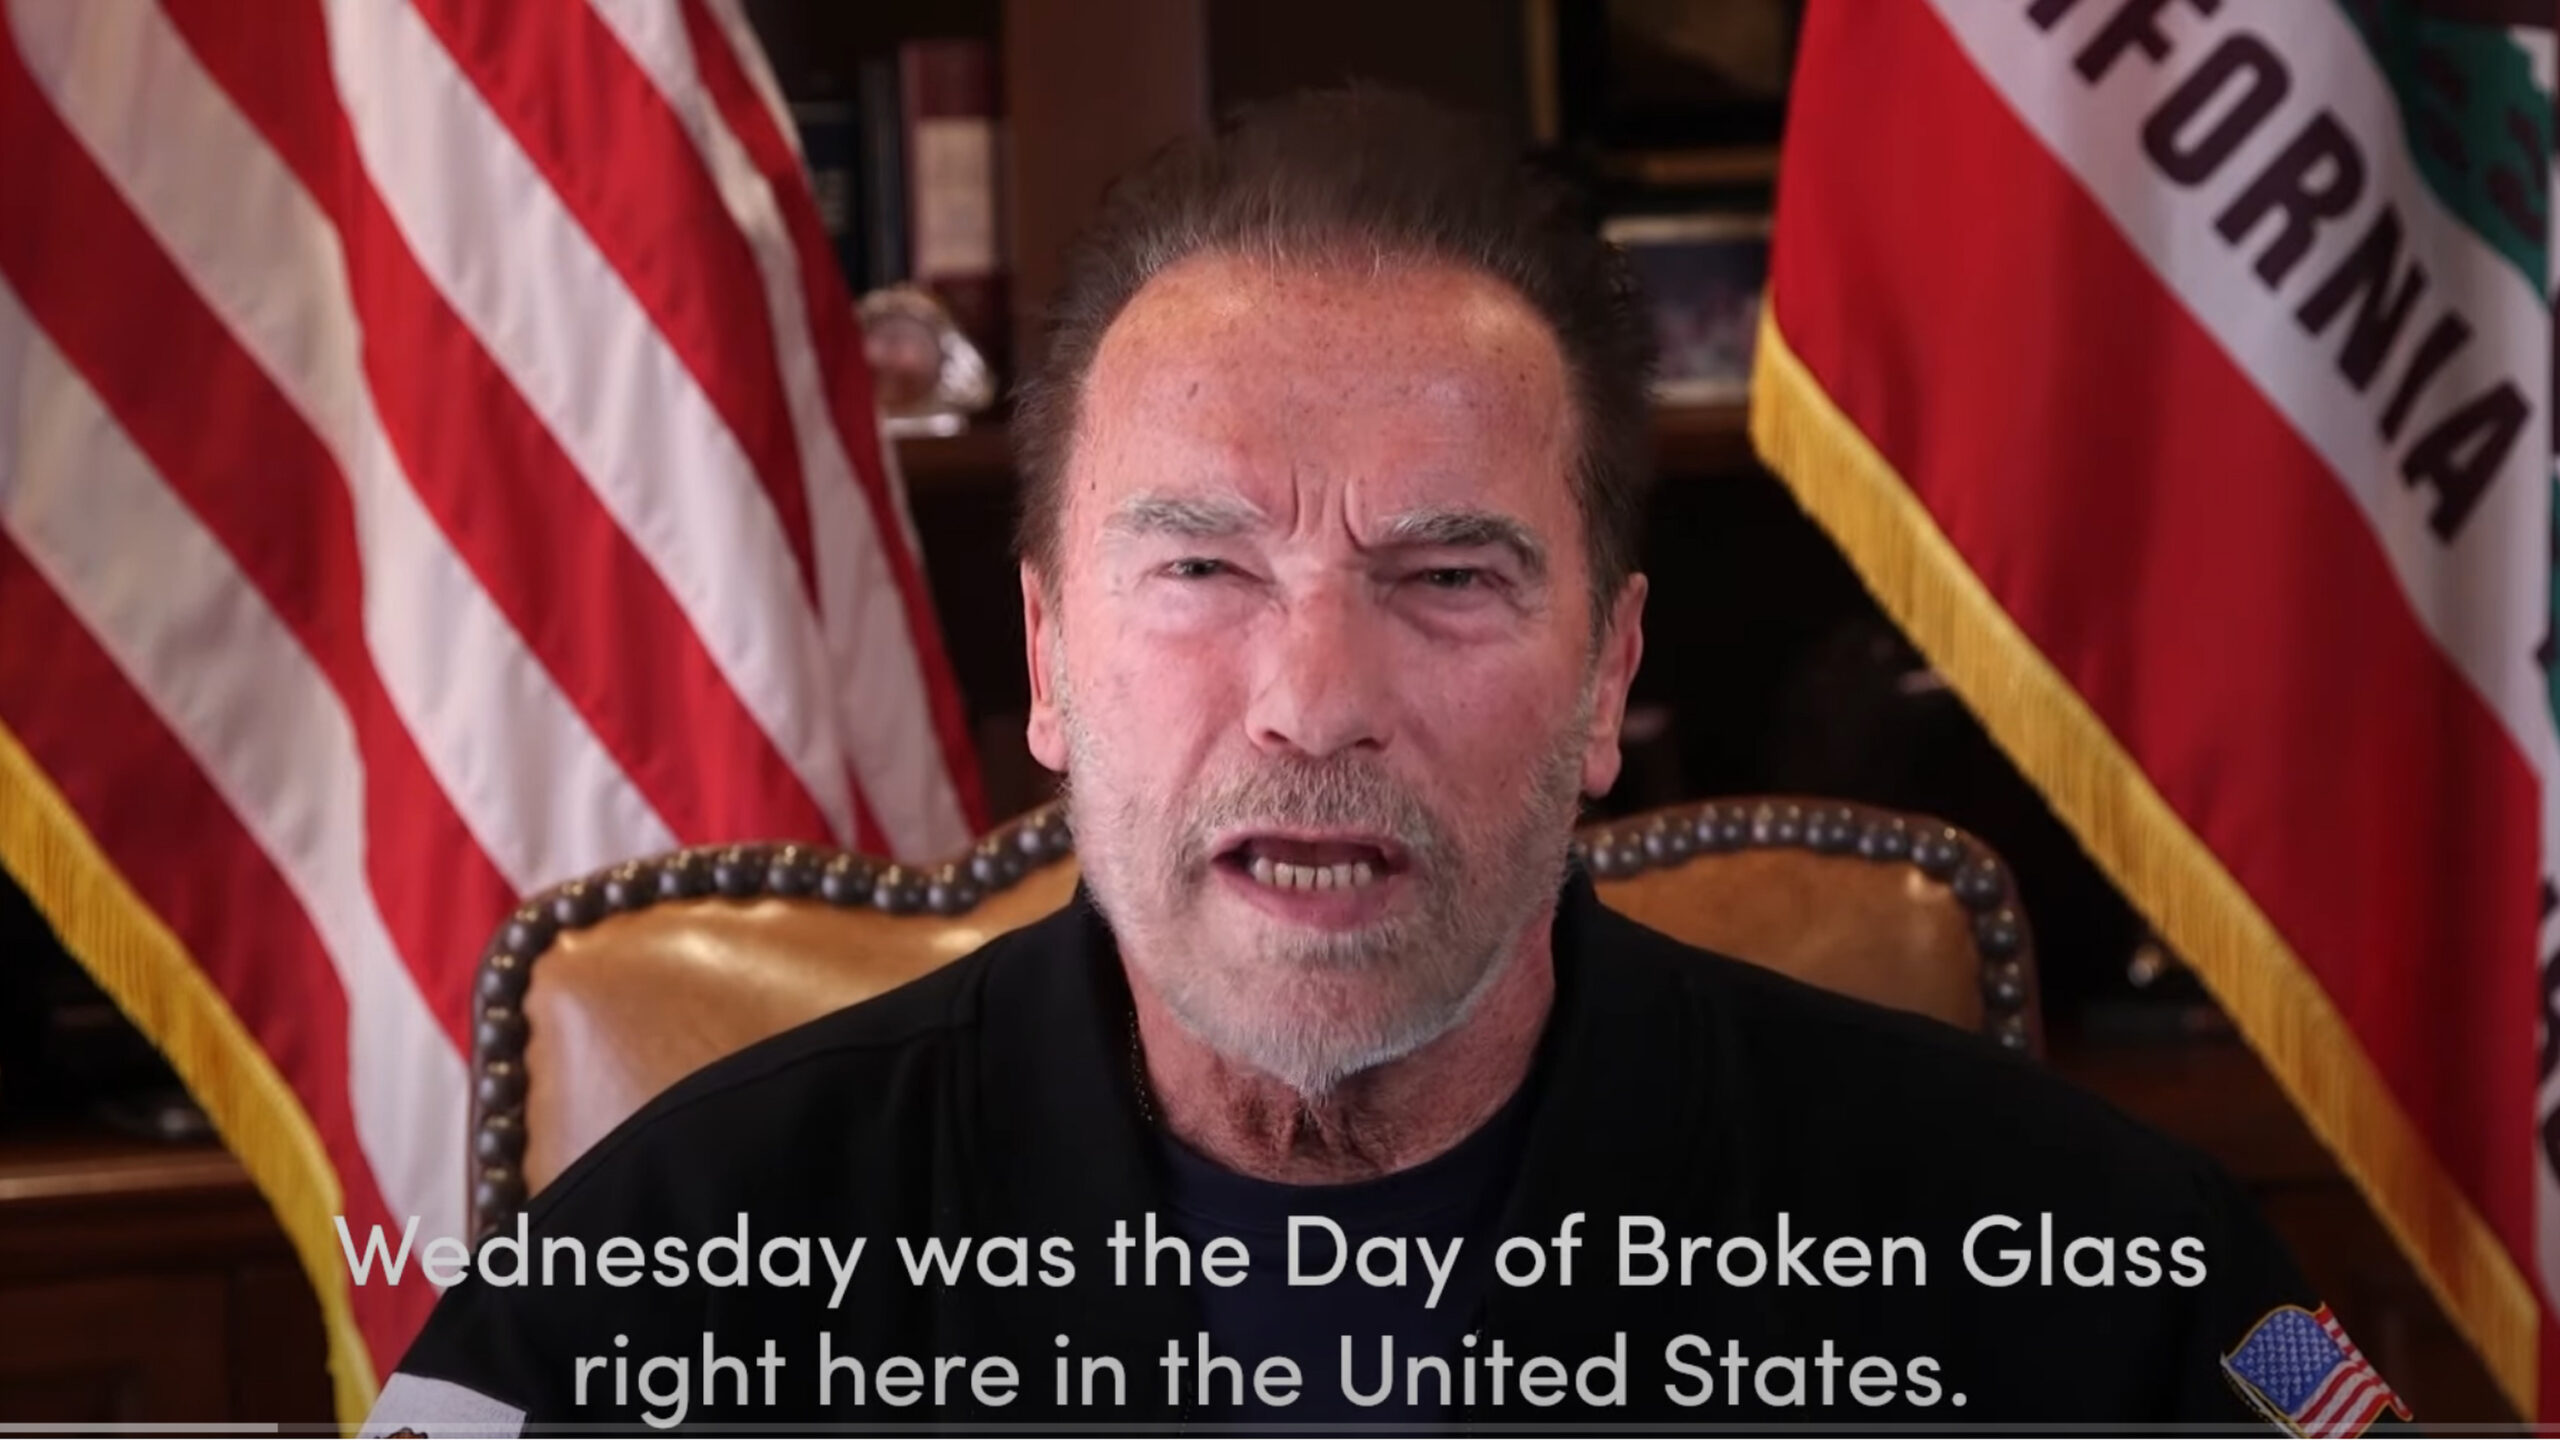 This Sunday, Jan. 10, 2021, image from a video released by Schwarzenegger shows former Republican California Gov. Arnold Schwarzenegger delivering a public message. Schwarzenegger compared the mob that stormed the U.S. Capitol to the Nazis and called President Donald Trump a failed leader who “will go down in history as the worst president ever.” (Frank Fastner/Arnold Schwarzenegger via AP)